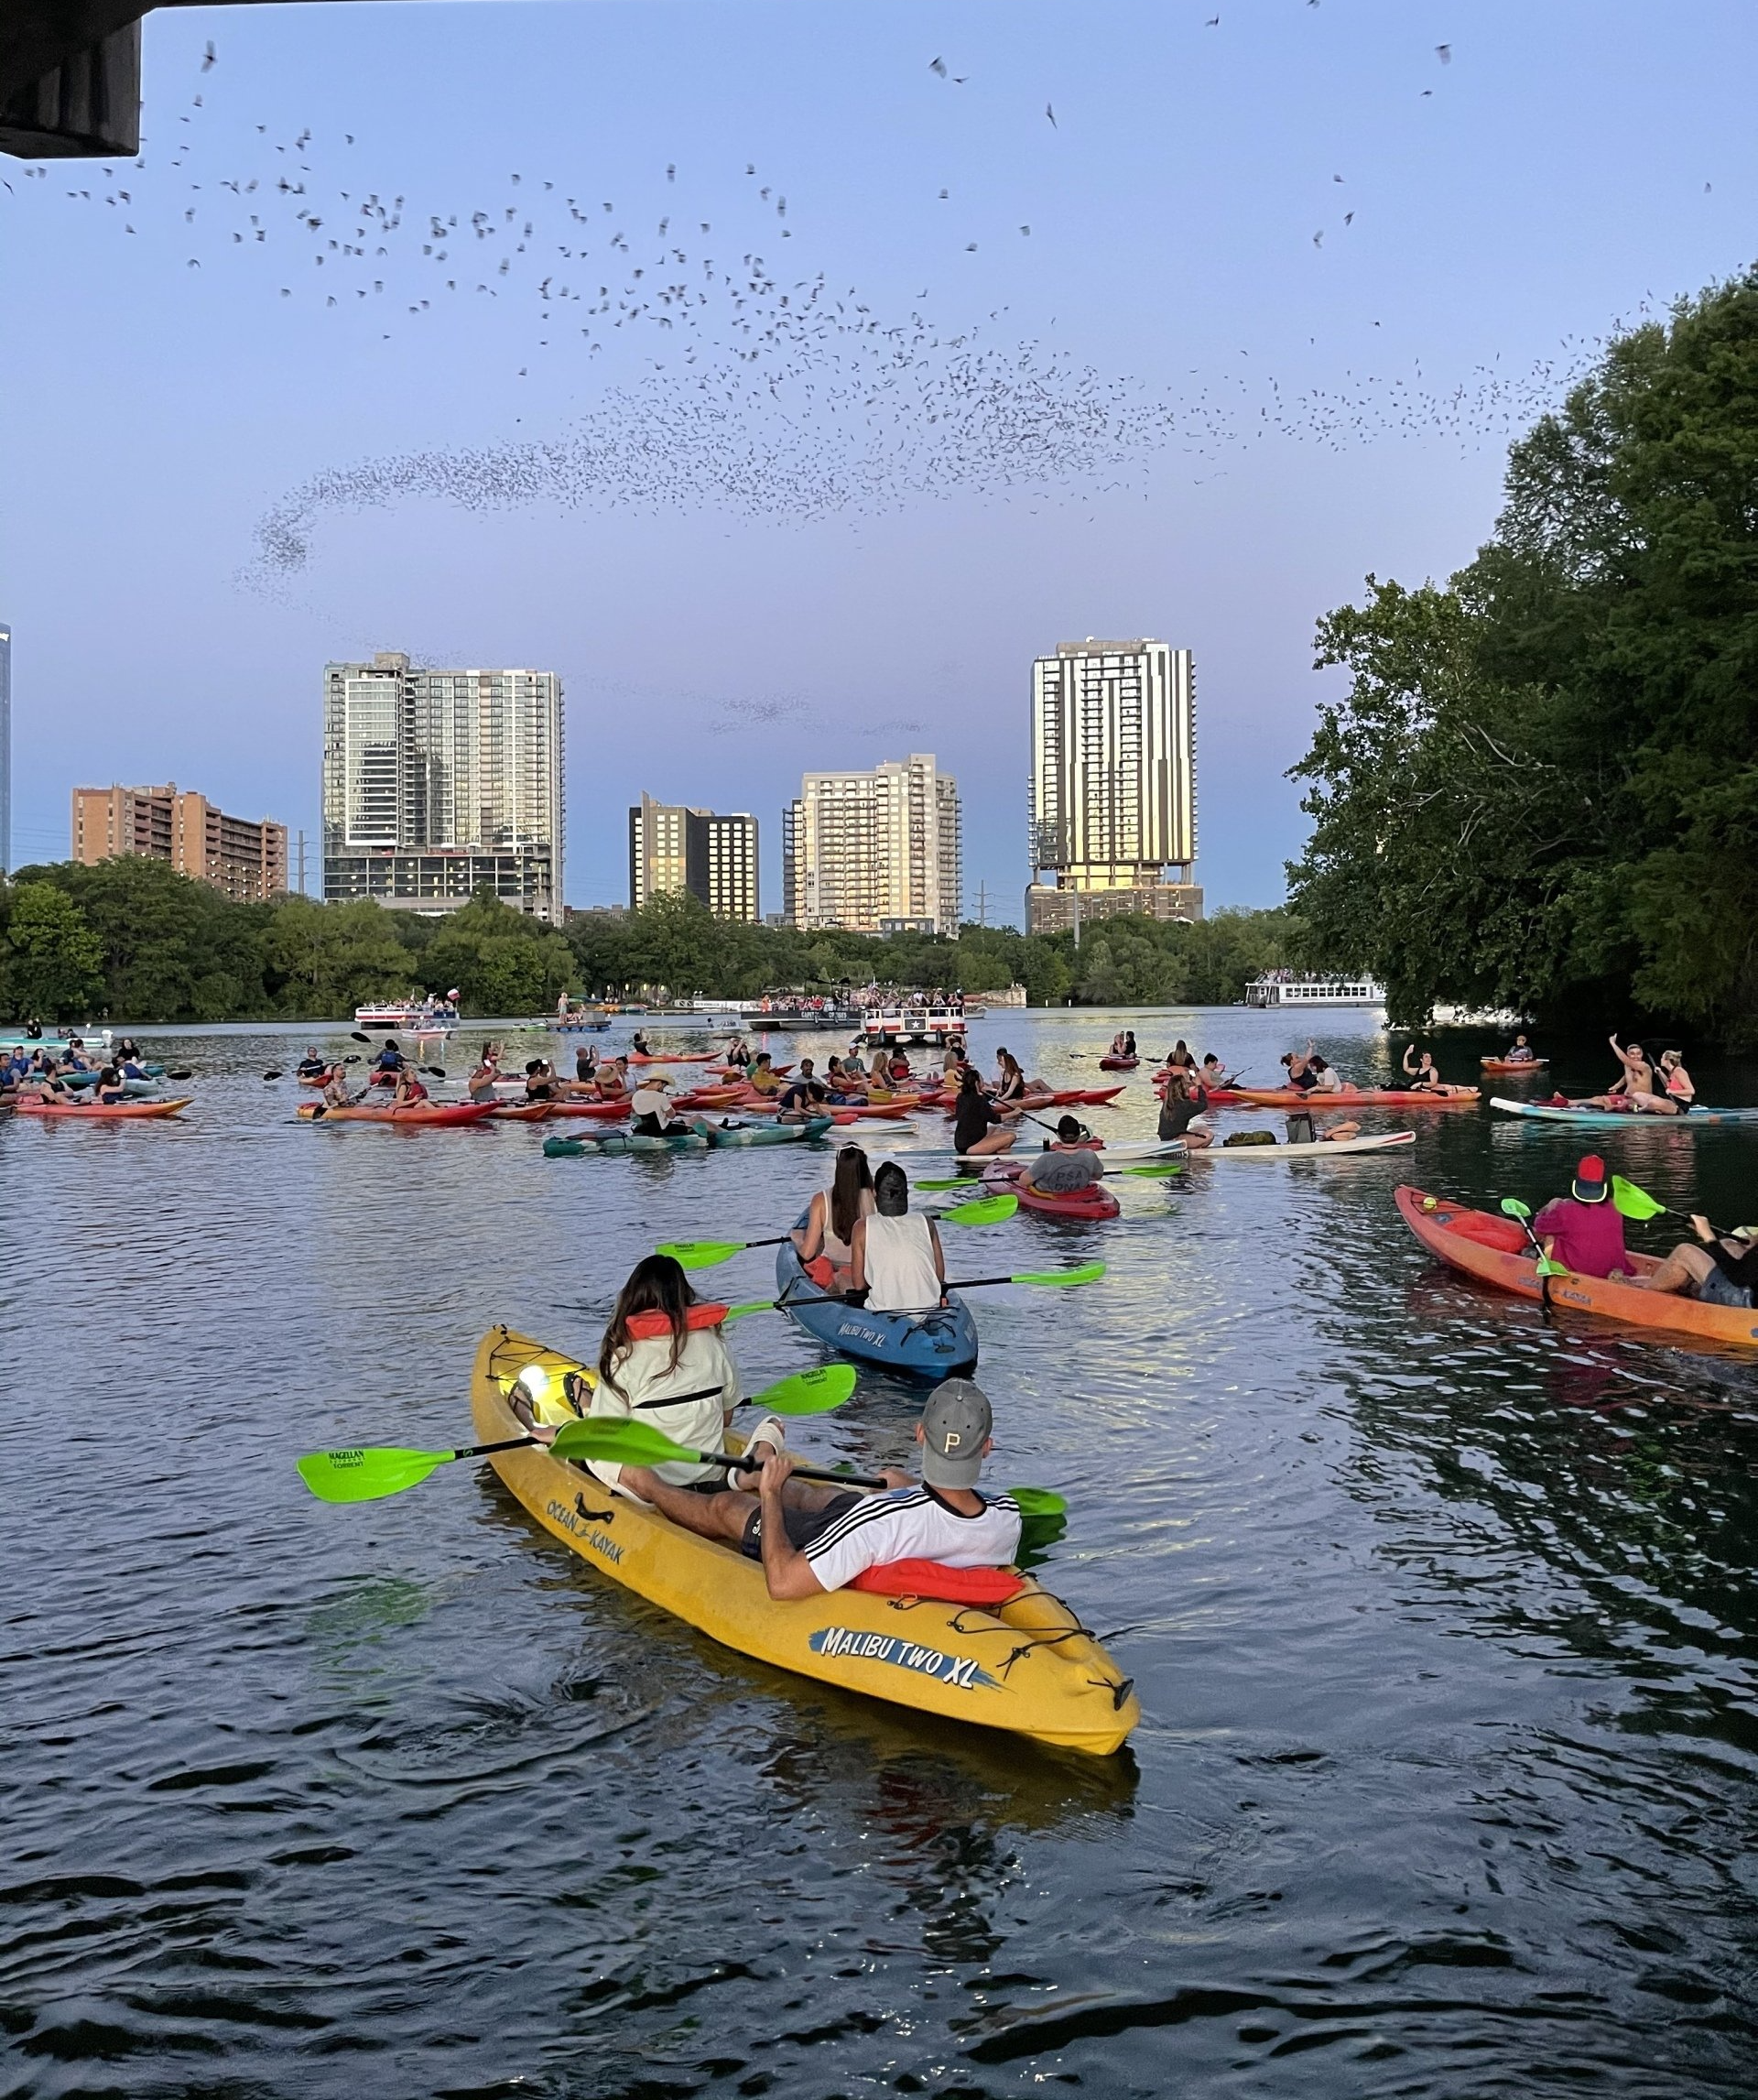 A group of people are paddling kayaks on a lake.